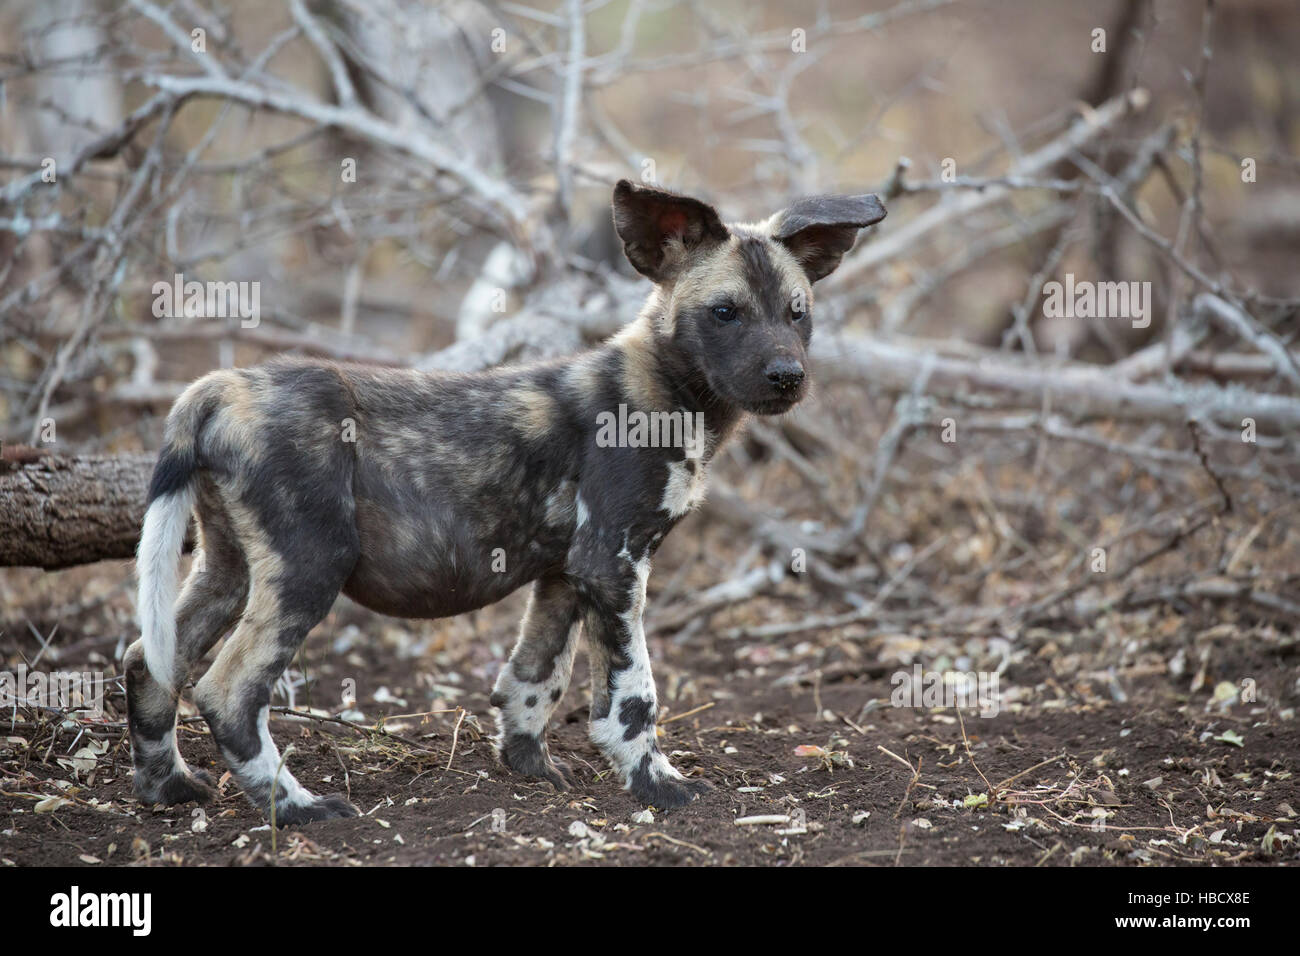 African wild dog pup (Lycaon pictus), Zimanga private game reserve, KwaZulu-Natal, South Africa Stock Photo